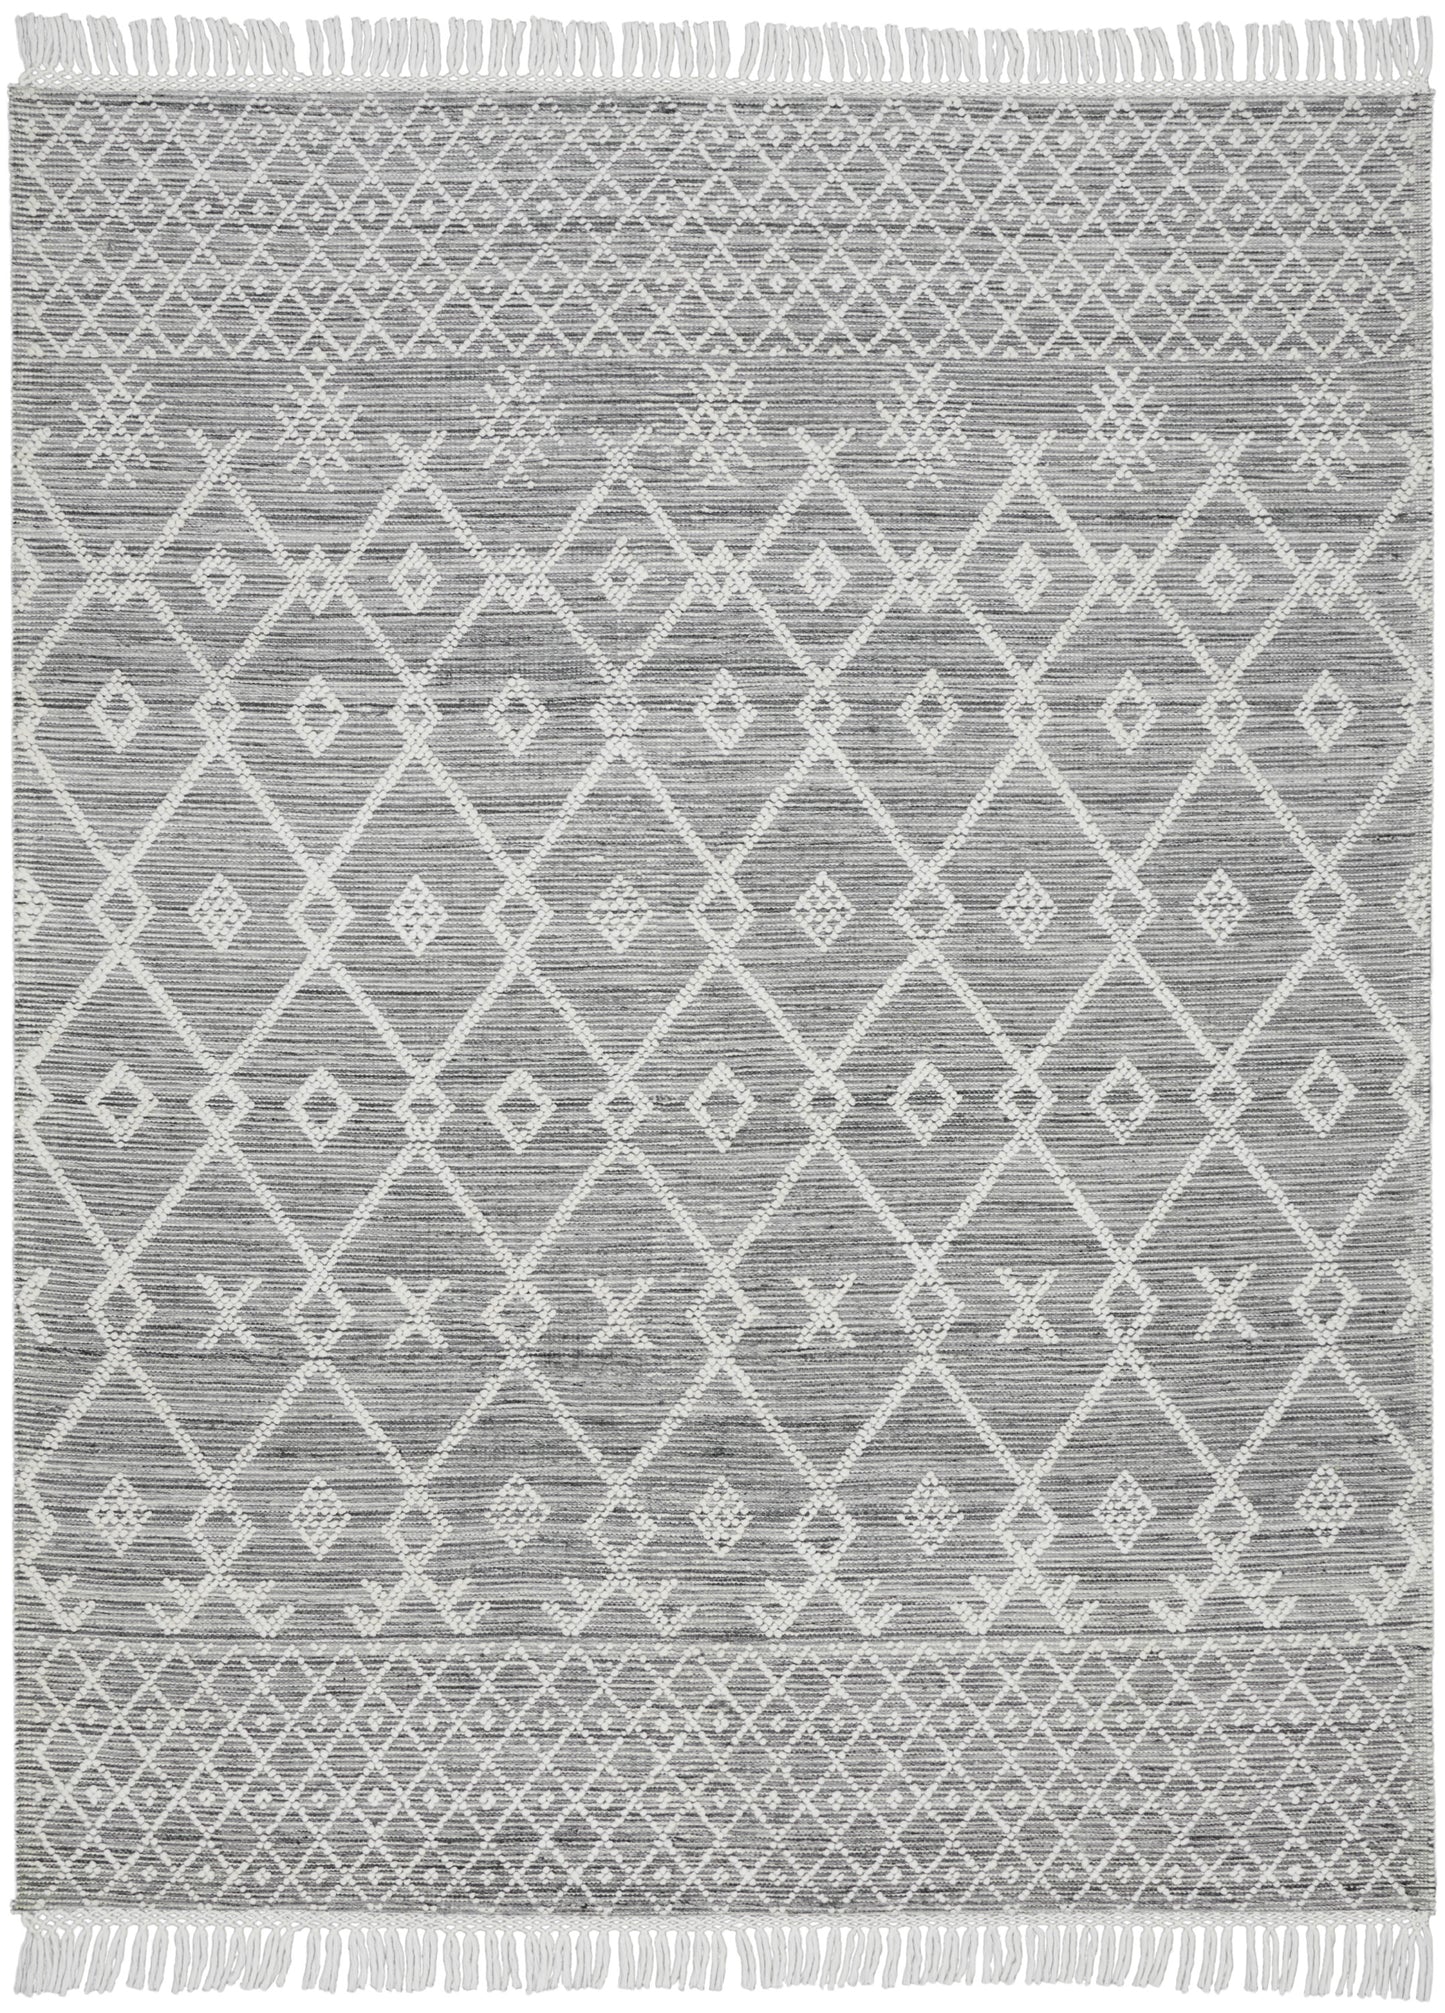 Nicole Curtis Series 3 SR302 Grey Ivory  Contemporary Woven Rug